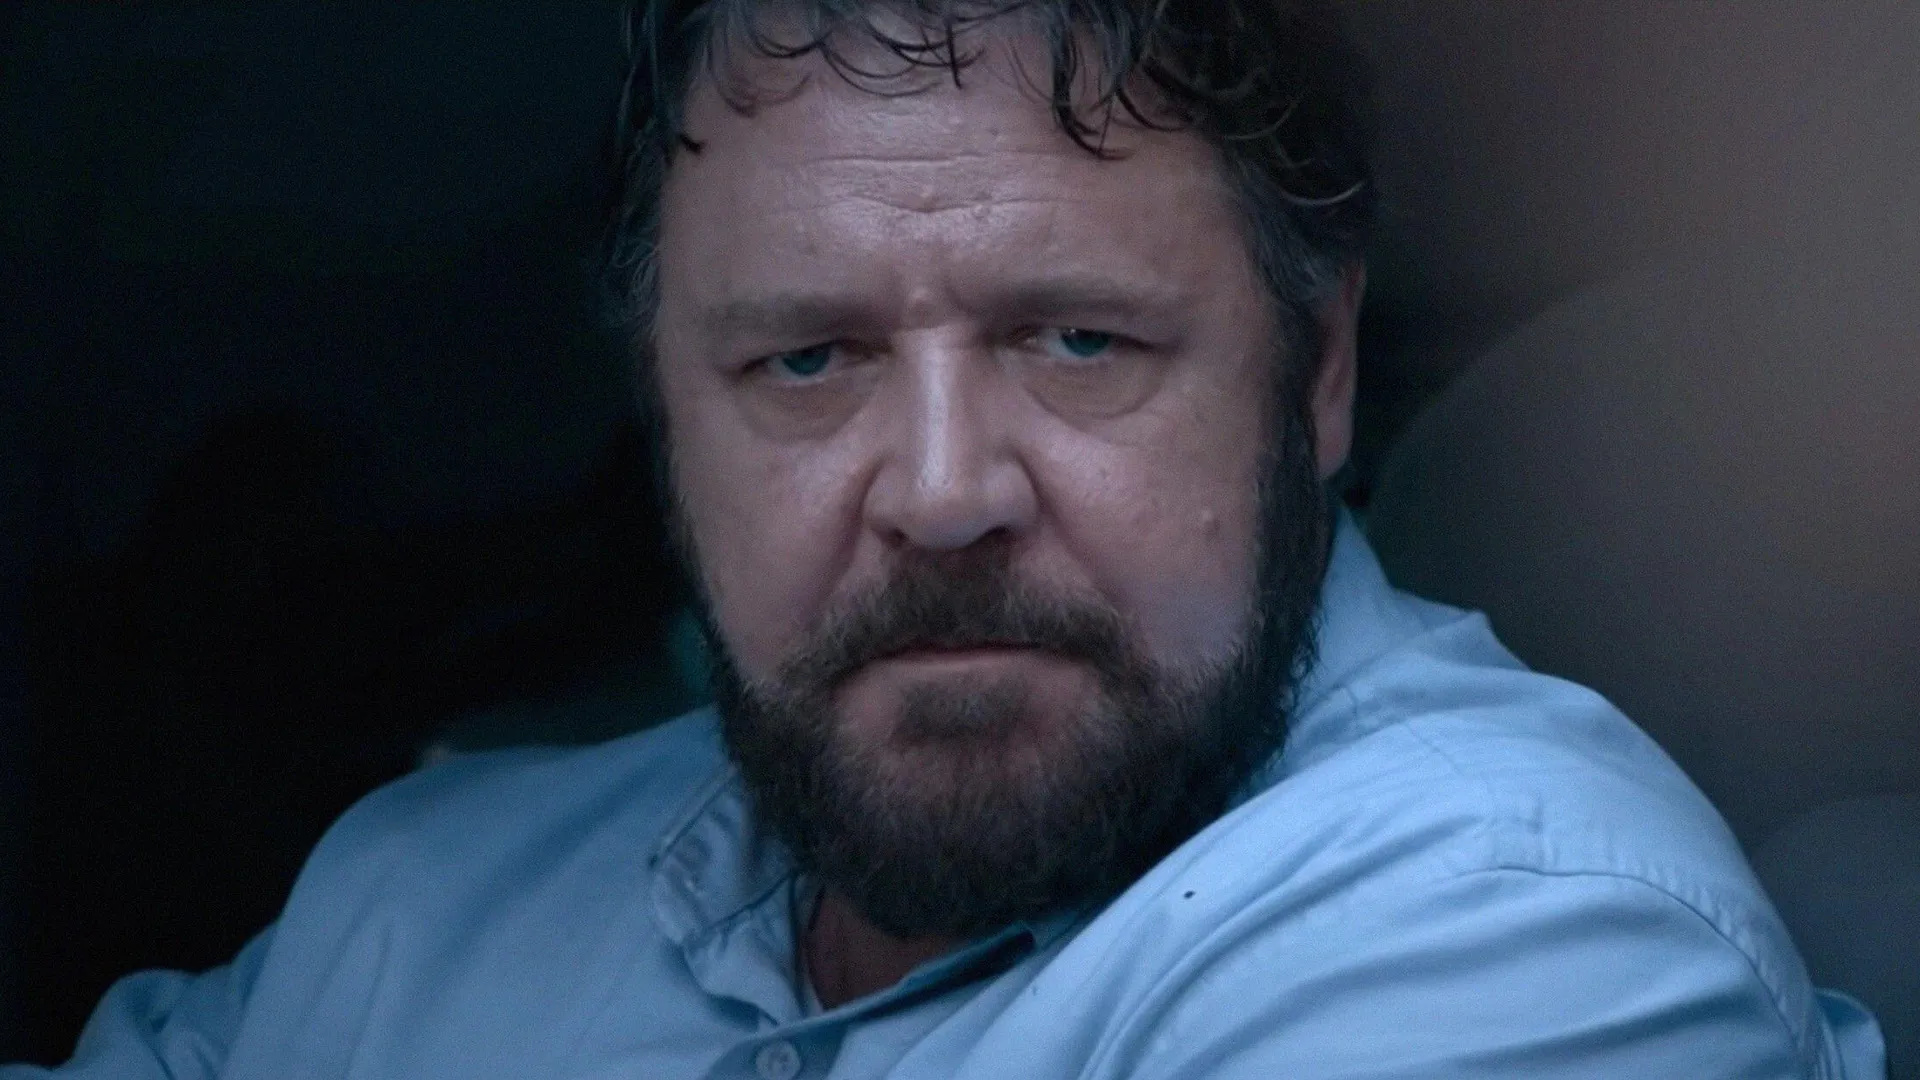 Russell Crowe, Unhinged review, Jaws, British GQ, 1920x1080 Full HD Desktop